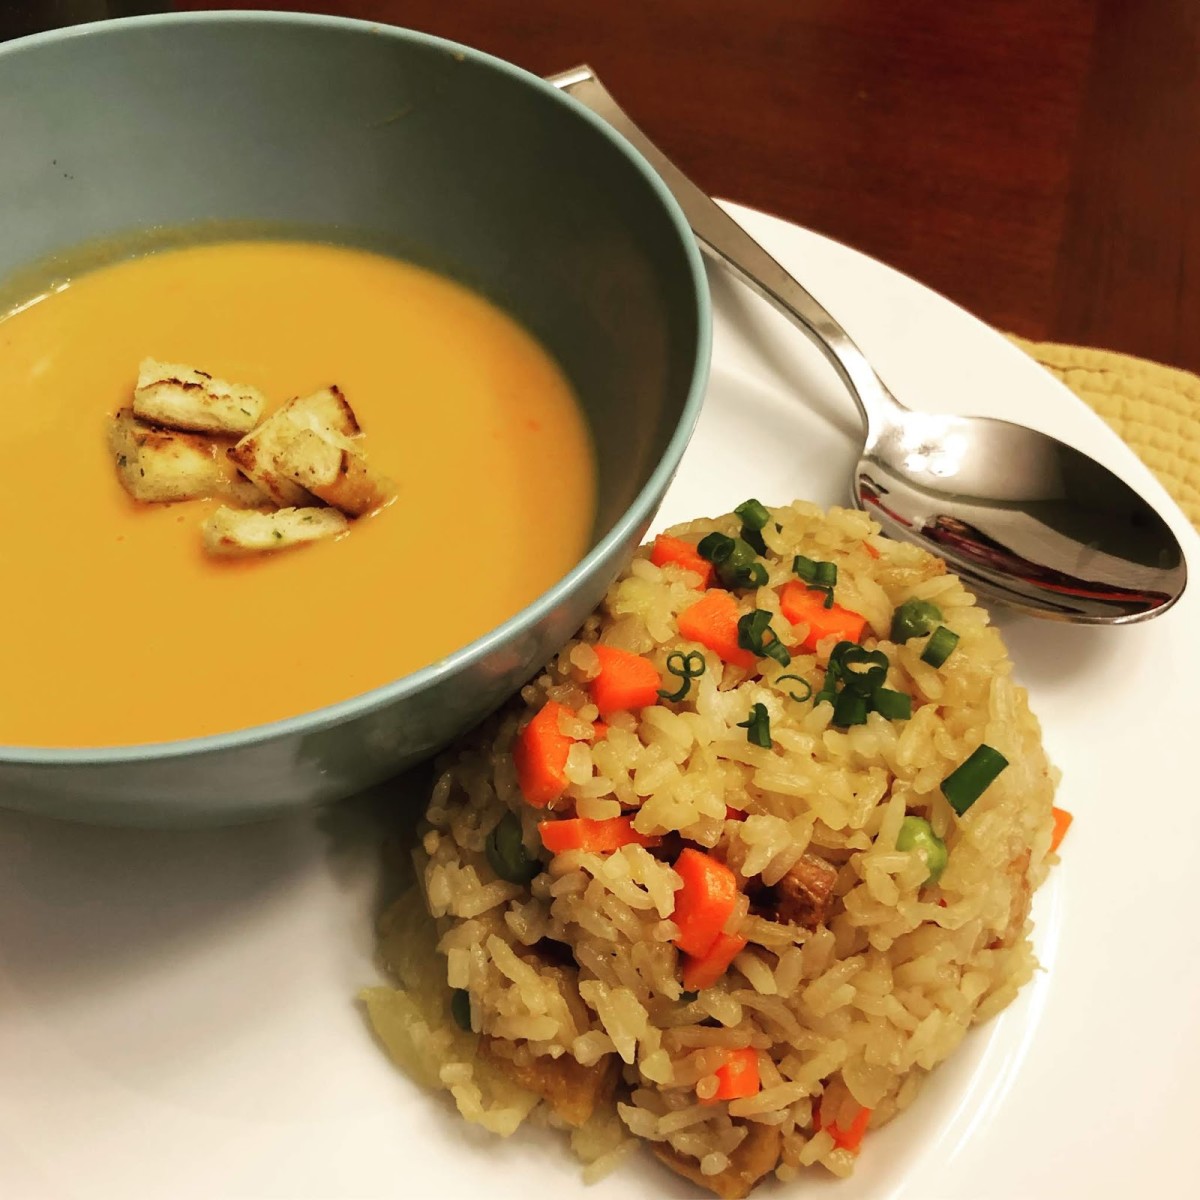 Egg-free veggie fried rice pictured with a butternut squash soup